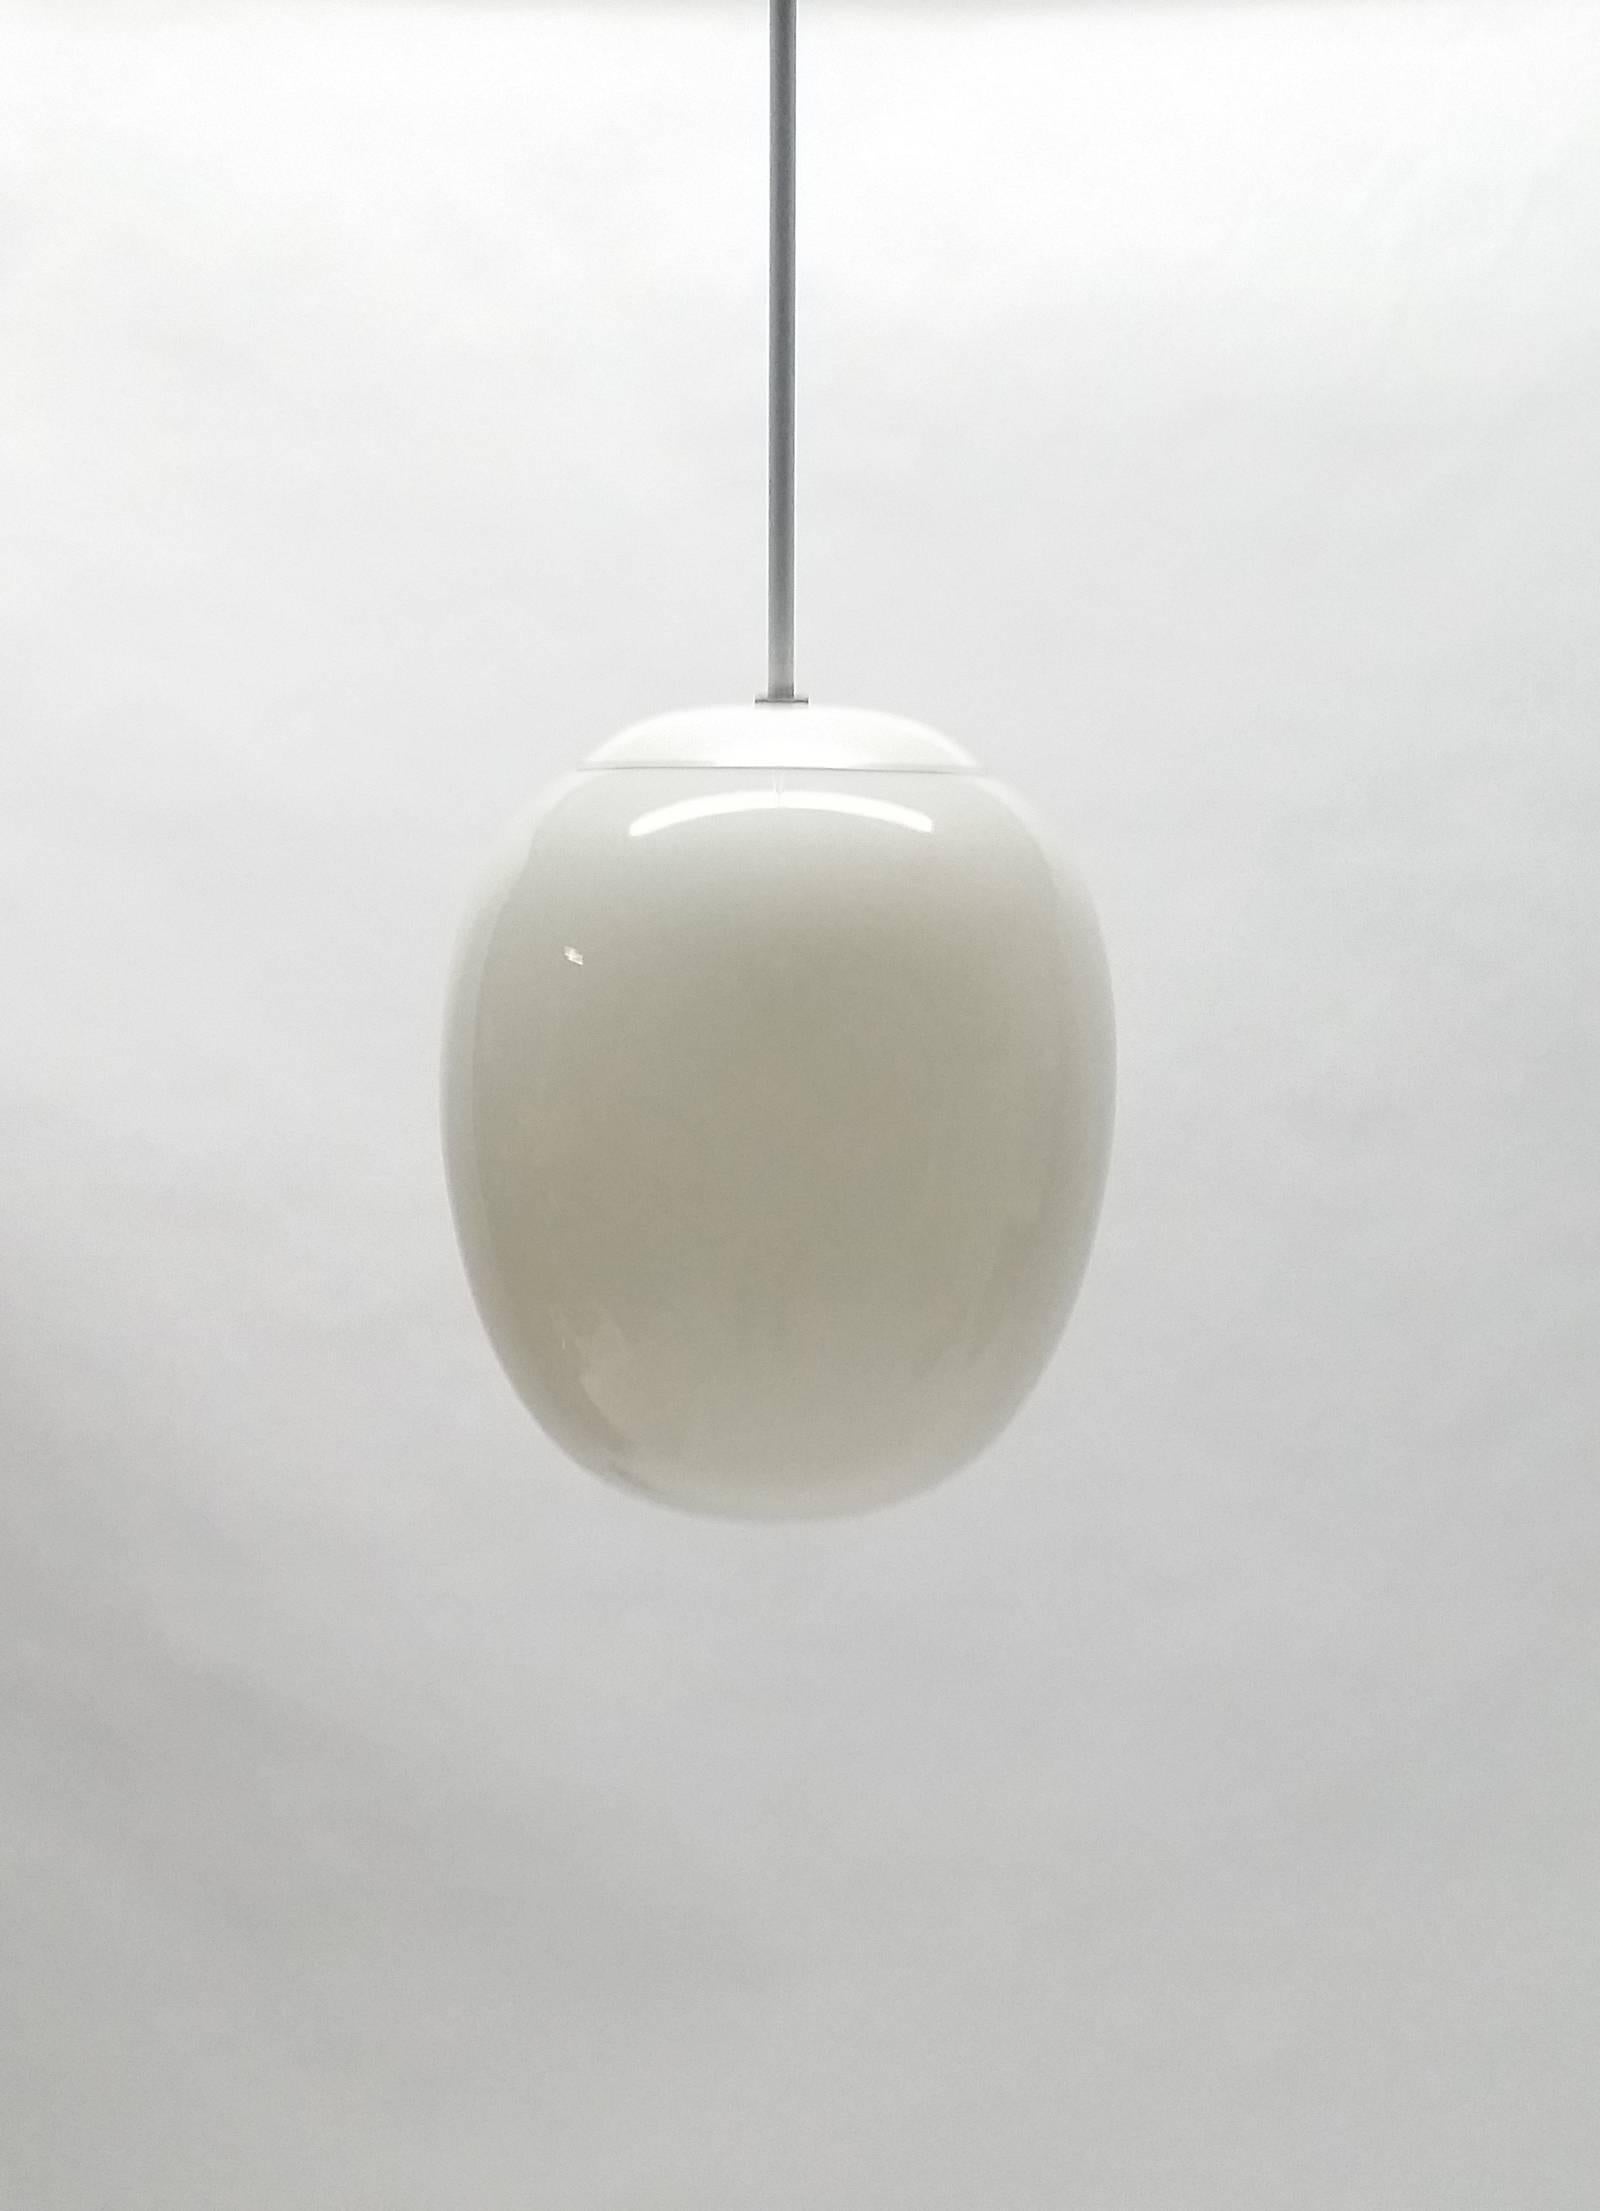 Vintage pendant light with egg shaped glass shade. The form is also very similar to Piet Hien's super egg or super-elipse. Fixture itself measures 12" tall x 9.5" wide. Drop is currently 20 inches, but we can have that changed to any spec